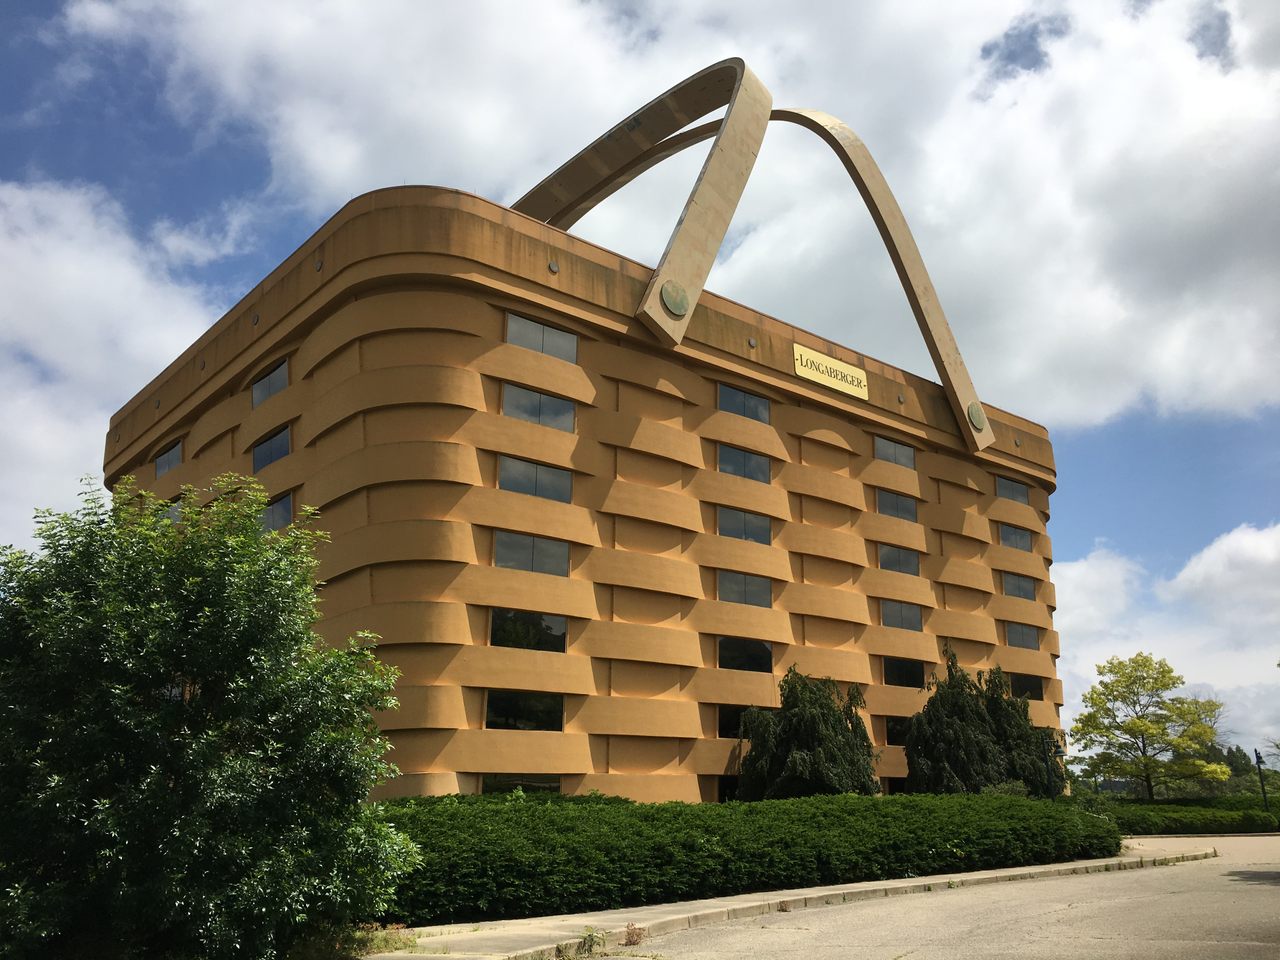 This bizarre building is set to become Ohio's newest luxury resort.